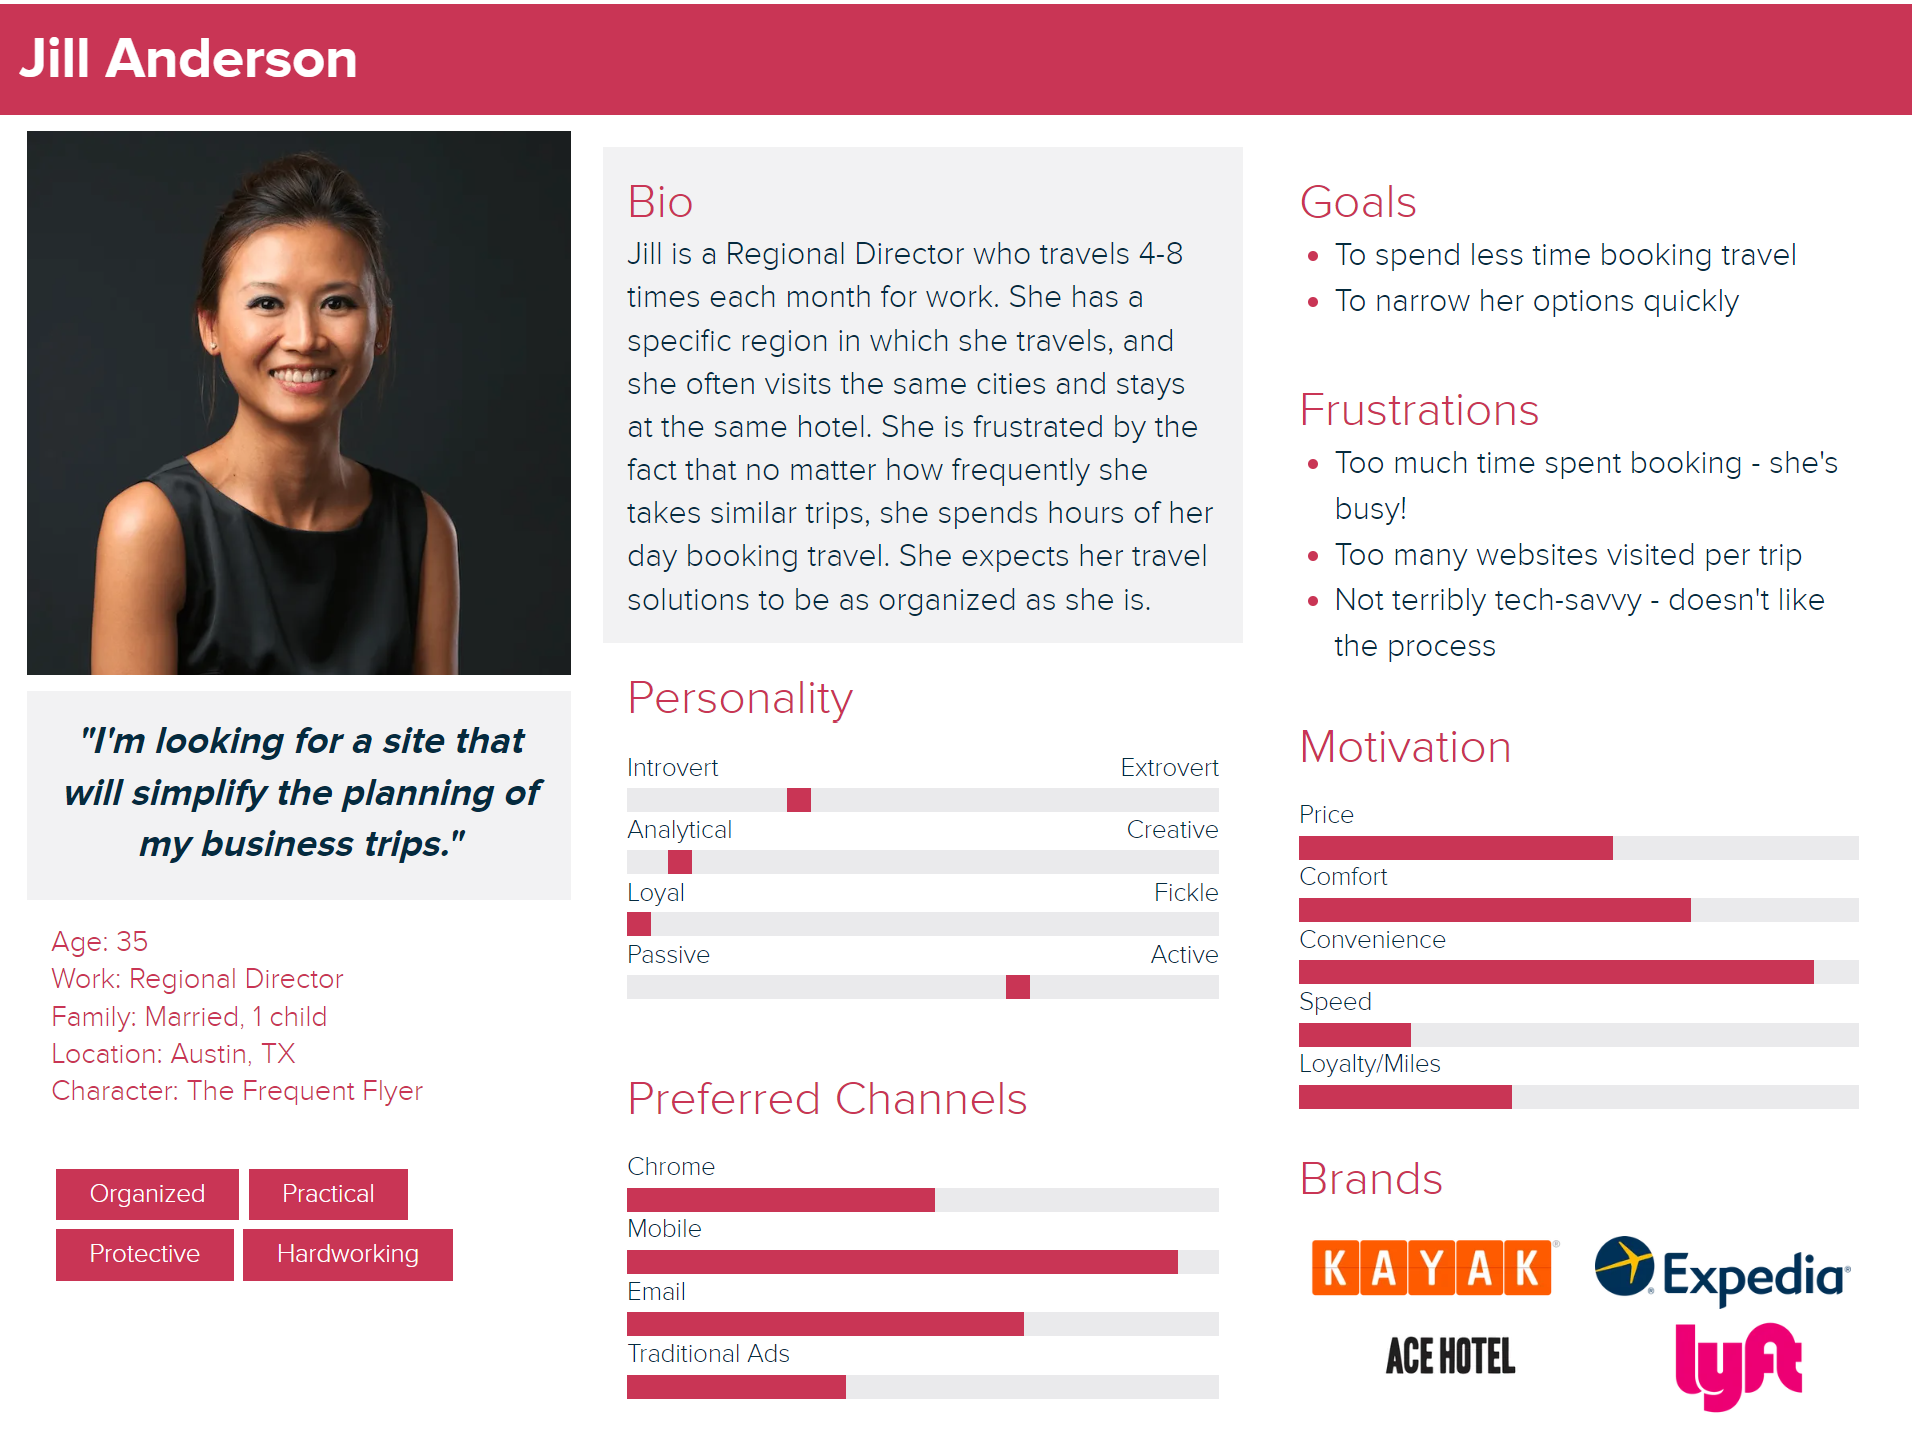 A user persona example